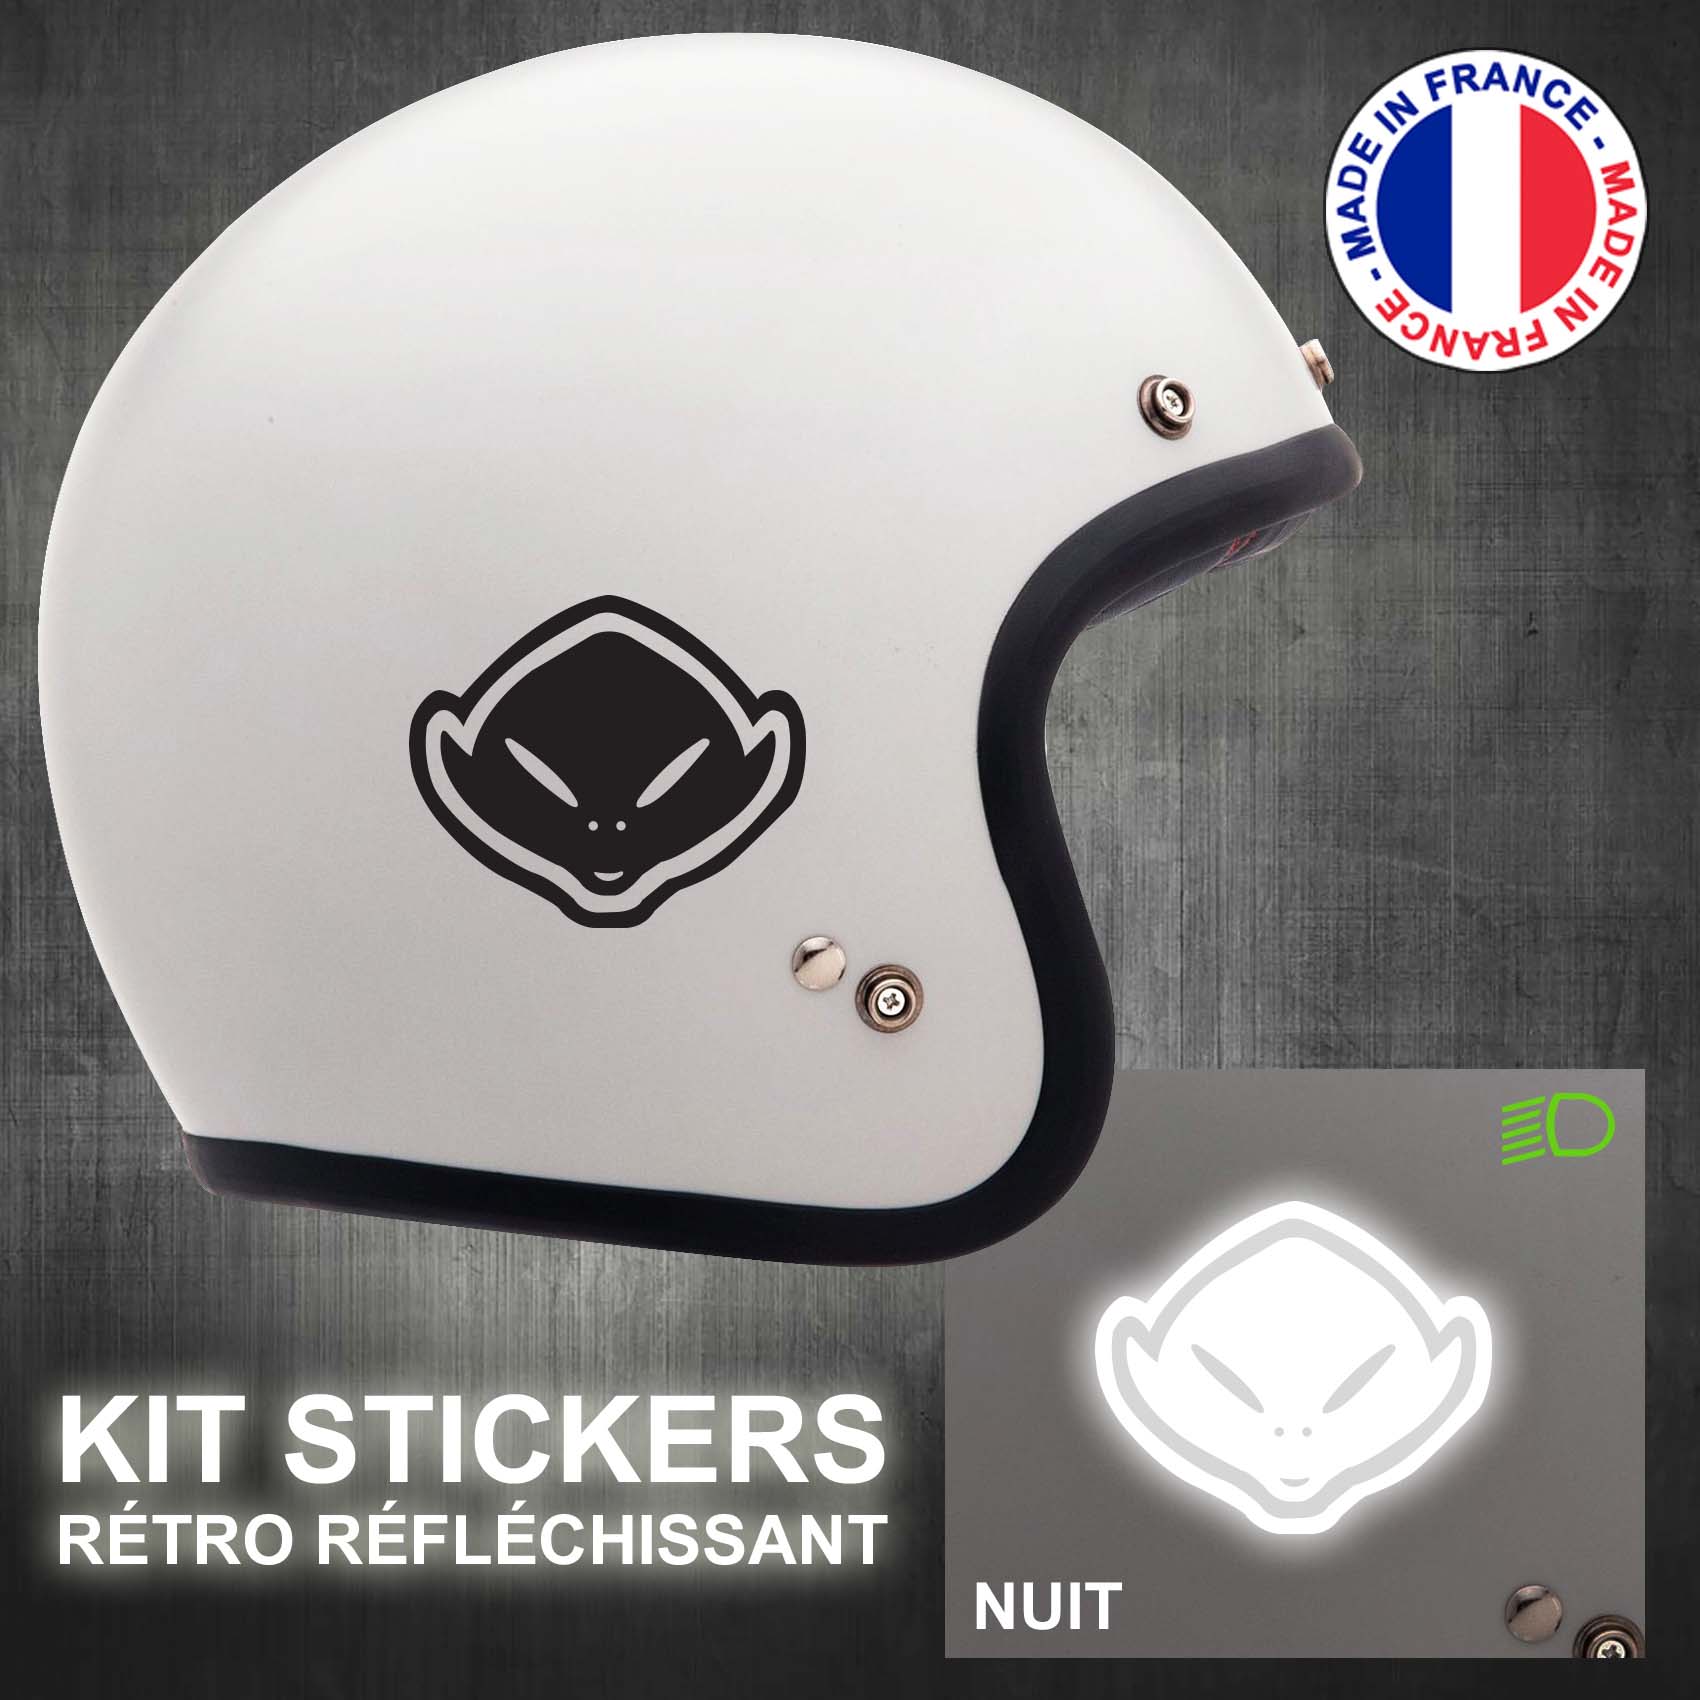 stickers-casque-moto-ufo-ref3-retro-reflechissant-autocollant-moto-velo-tuning-racing-route-sticker-casques-adhesif-scooter-nuit-securite-decals-personnalise-personnalisable-min